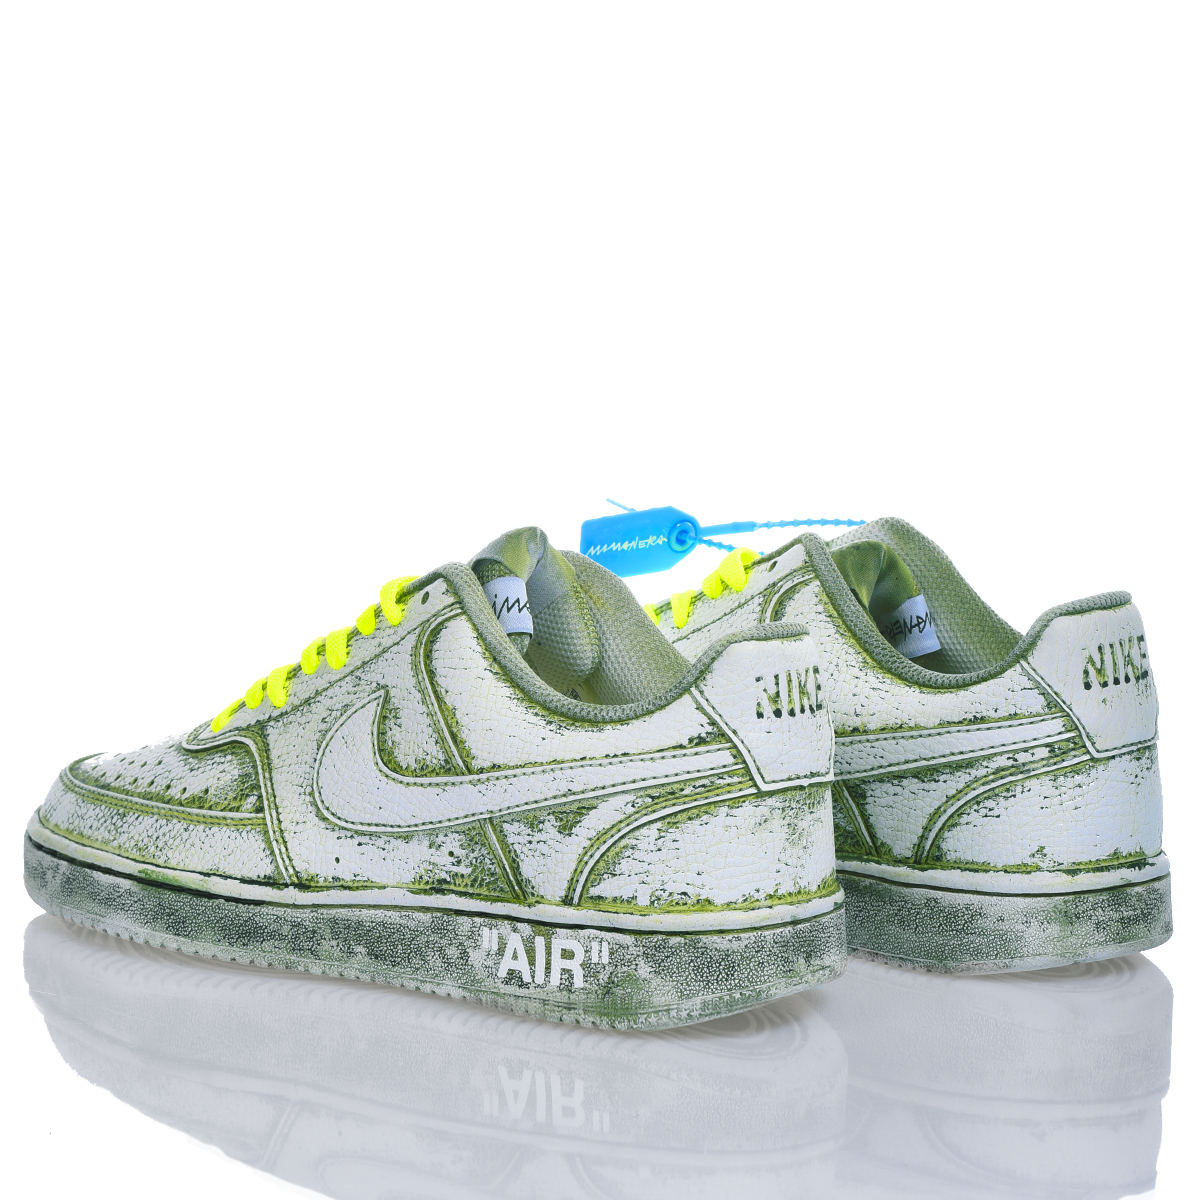 Nike Hydrogreen Court Vision Washed-out, Special